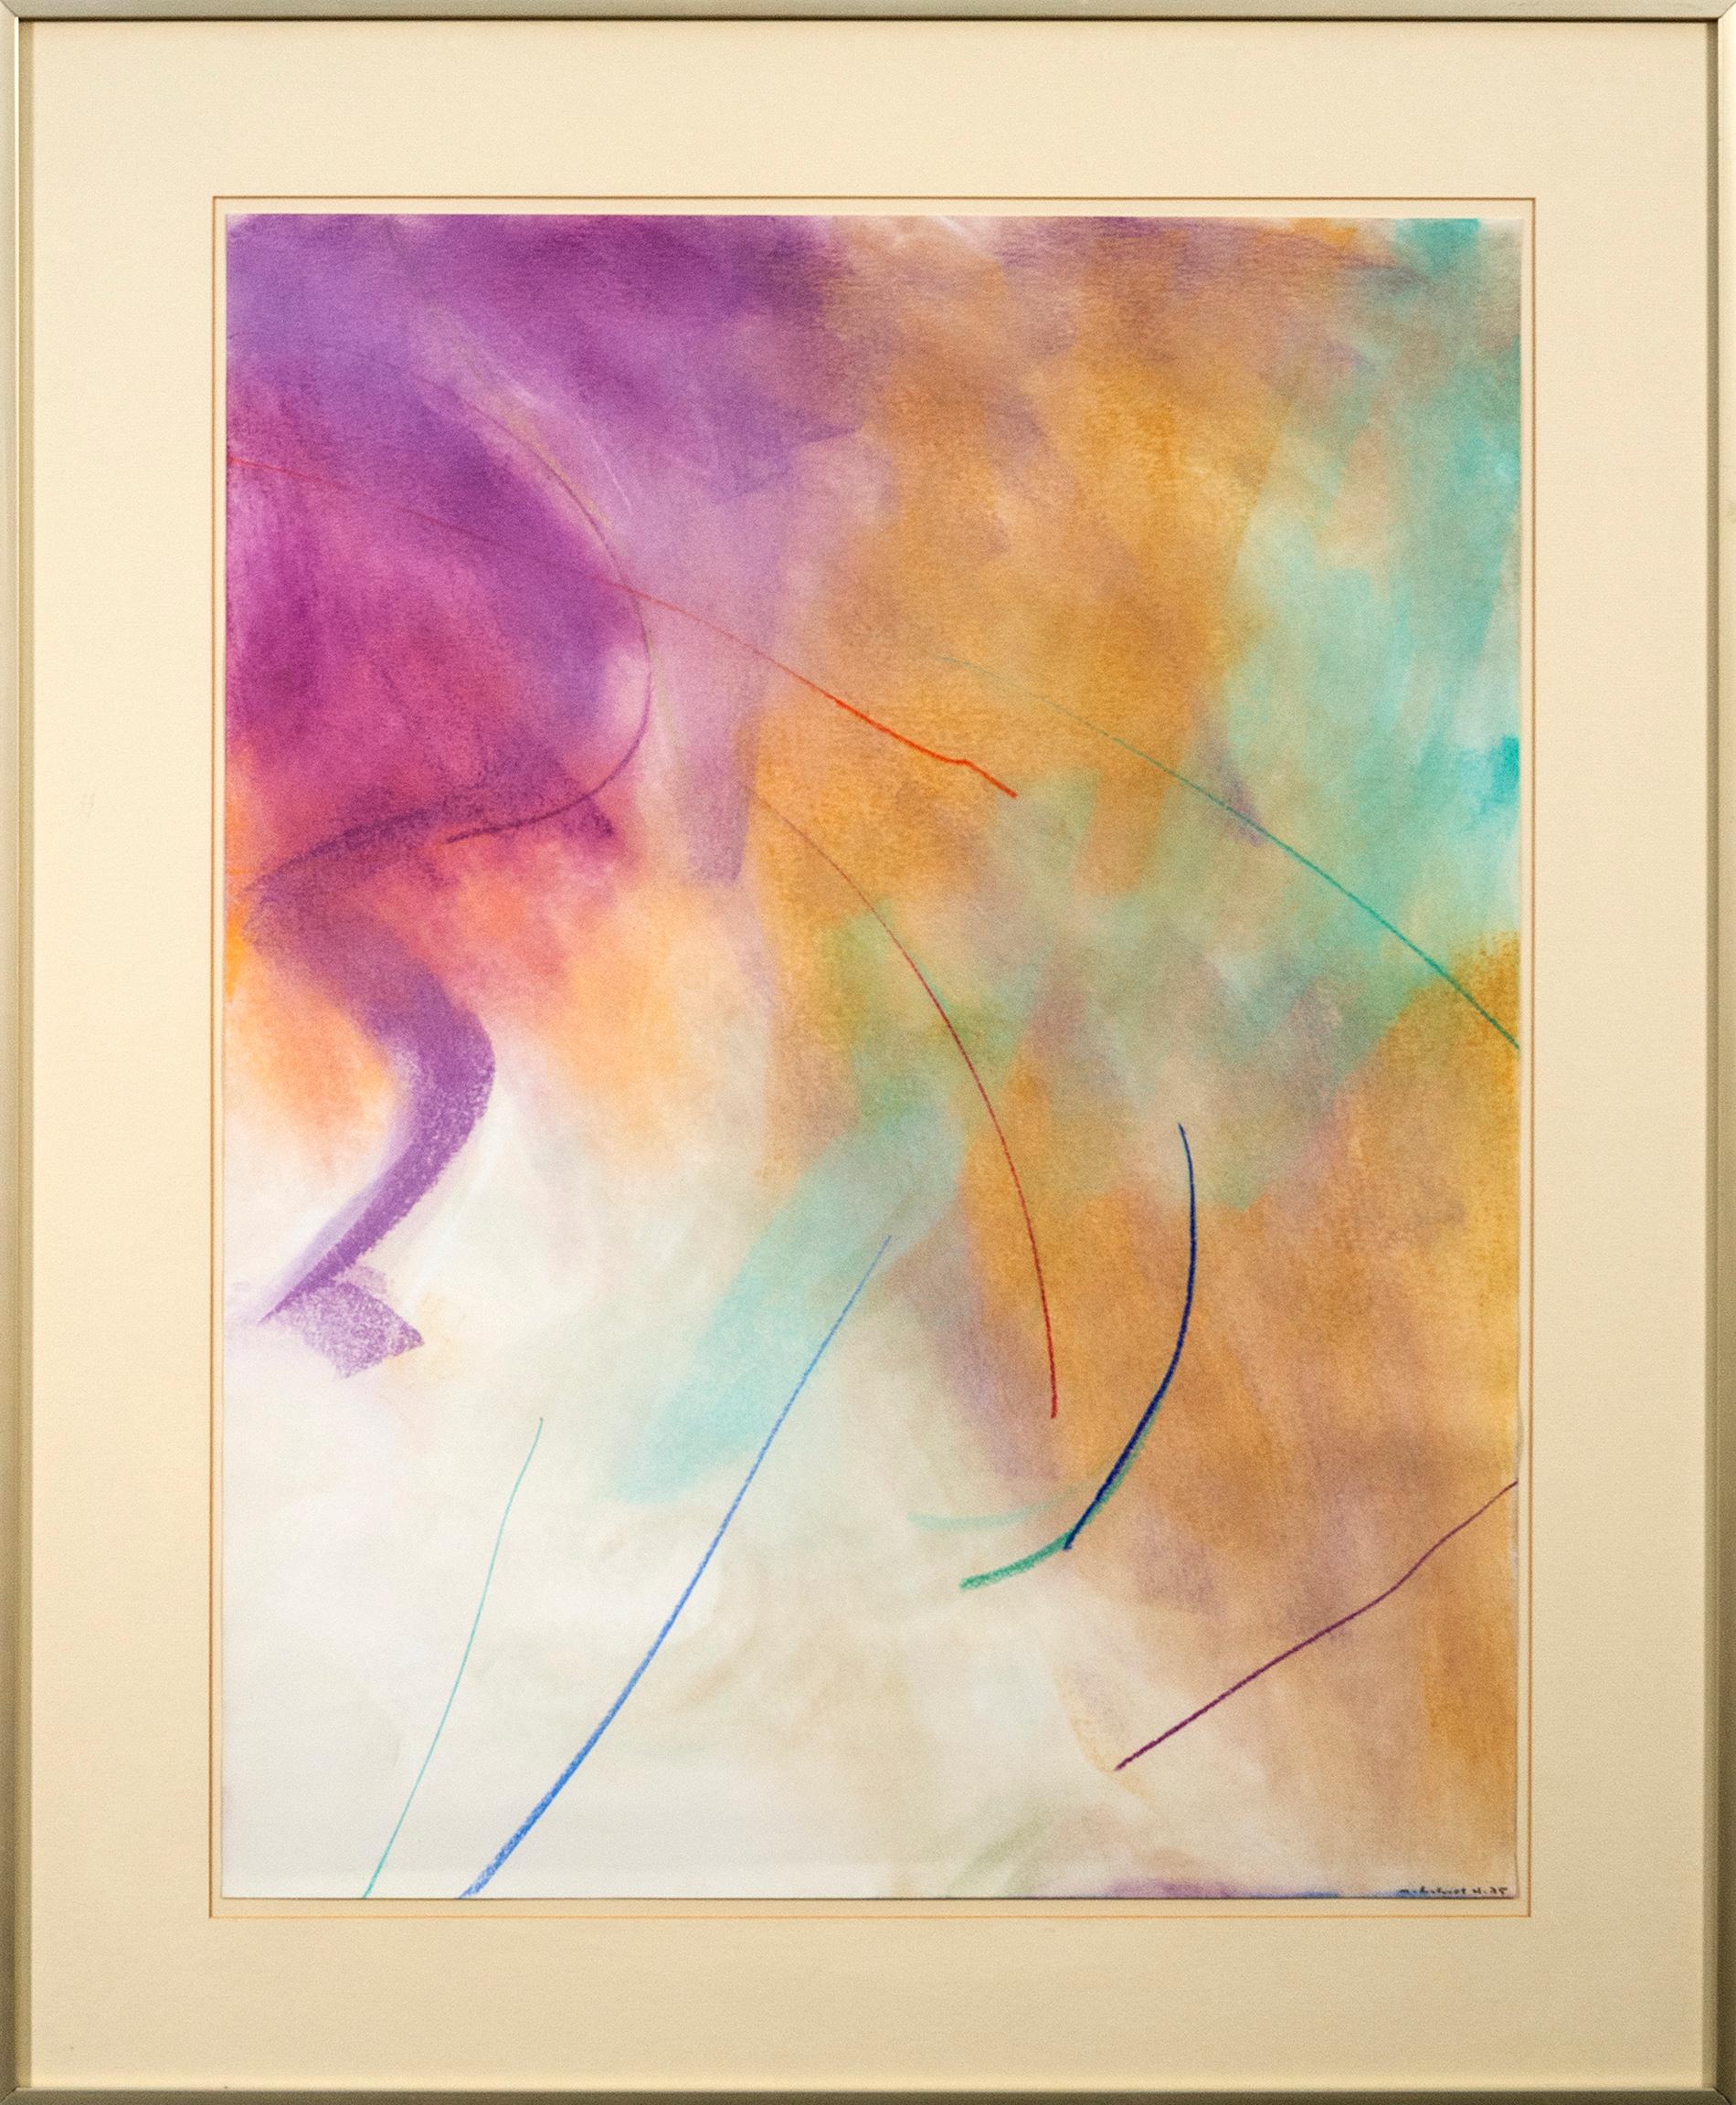 Untitled, Magenta, Sienna and Turquoise - expressive, abstract, pastel on paper - Painting by Milly Ristvedt